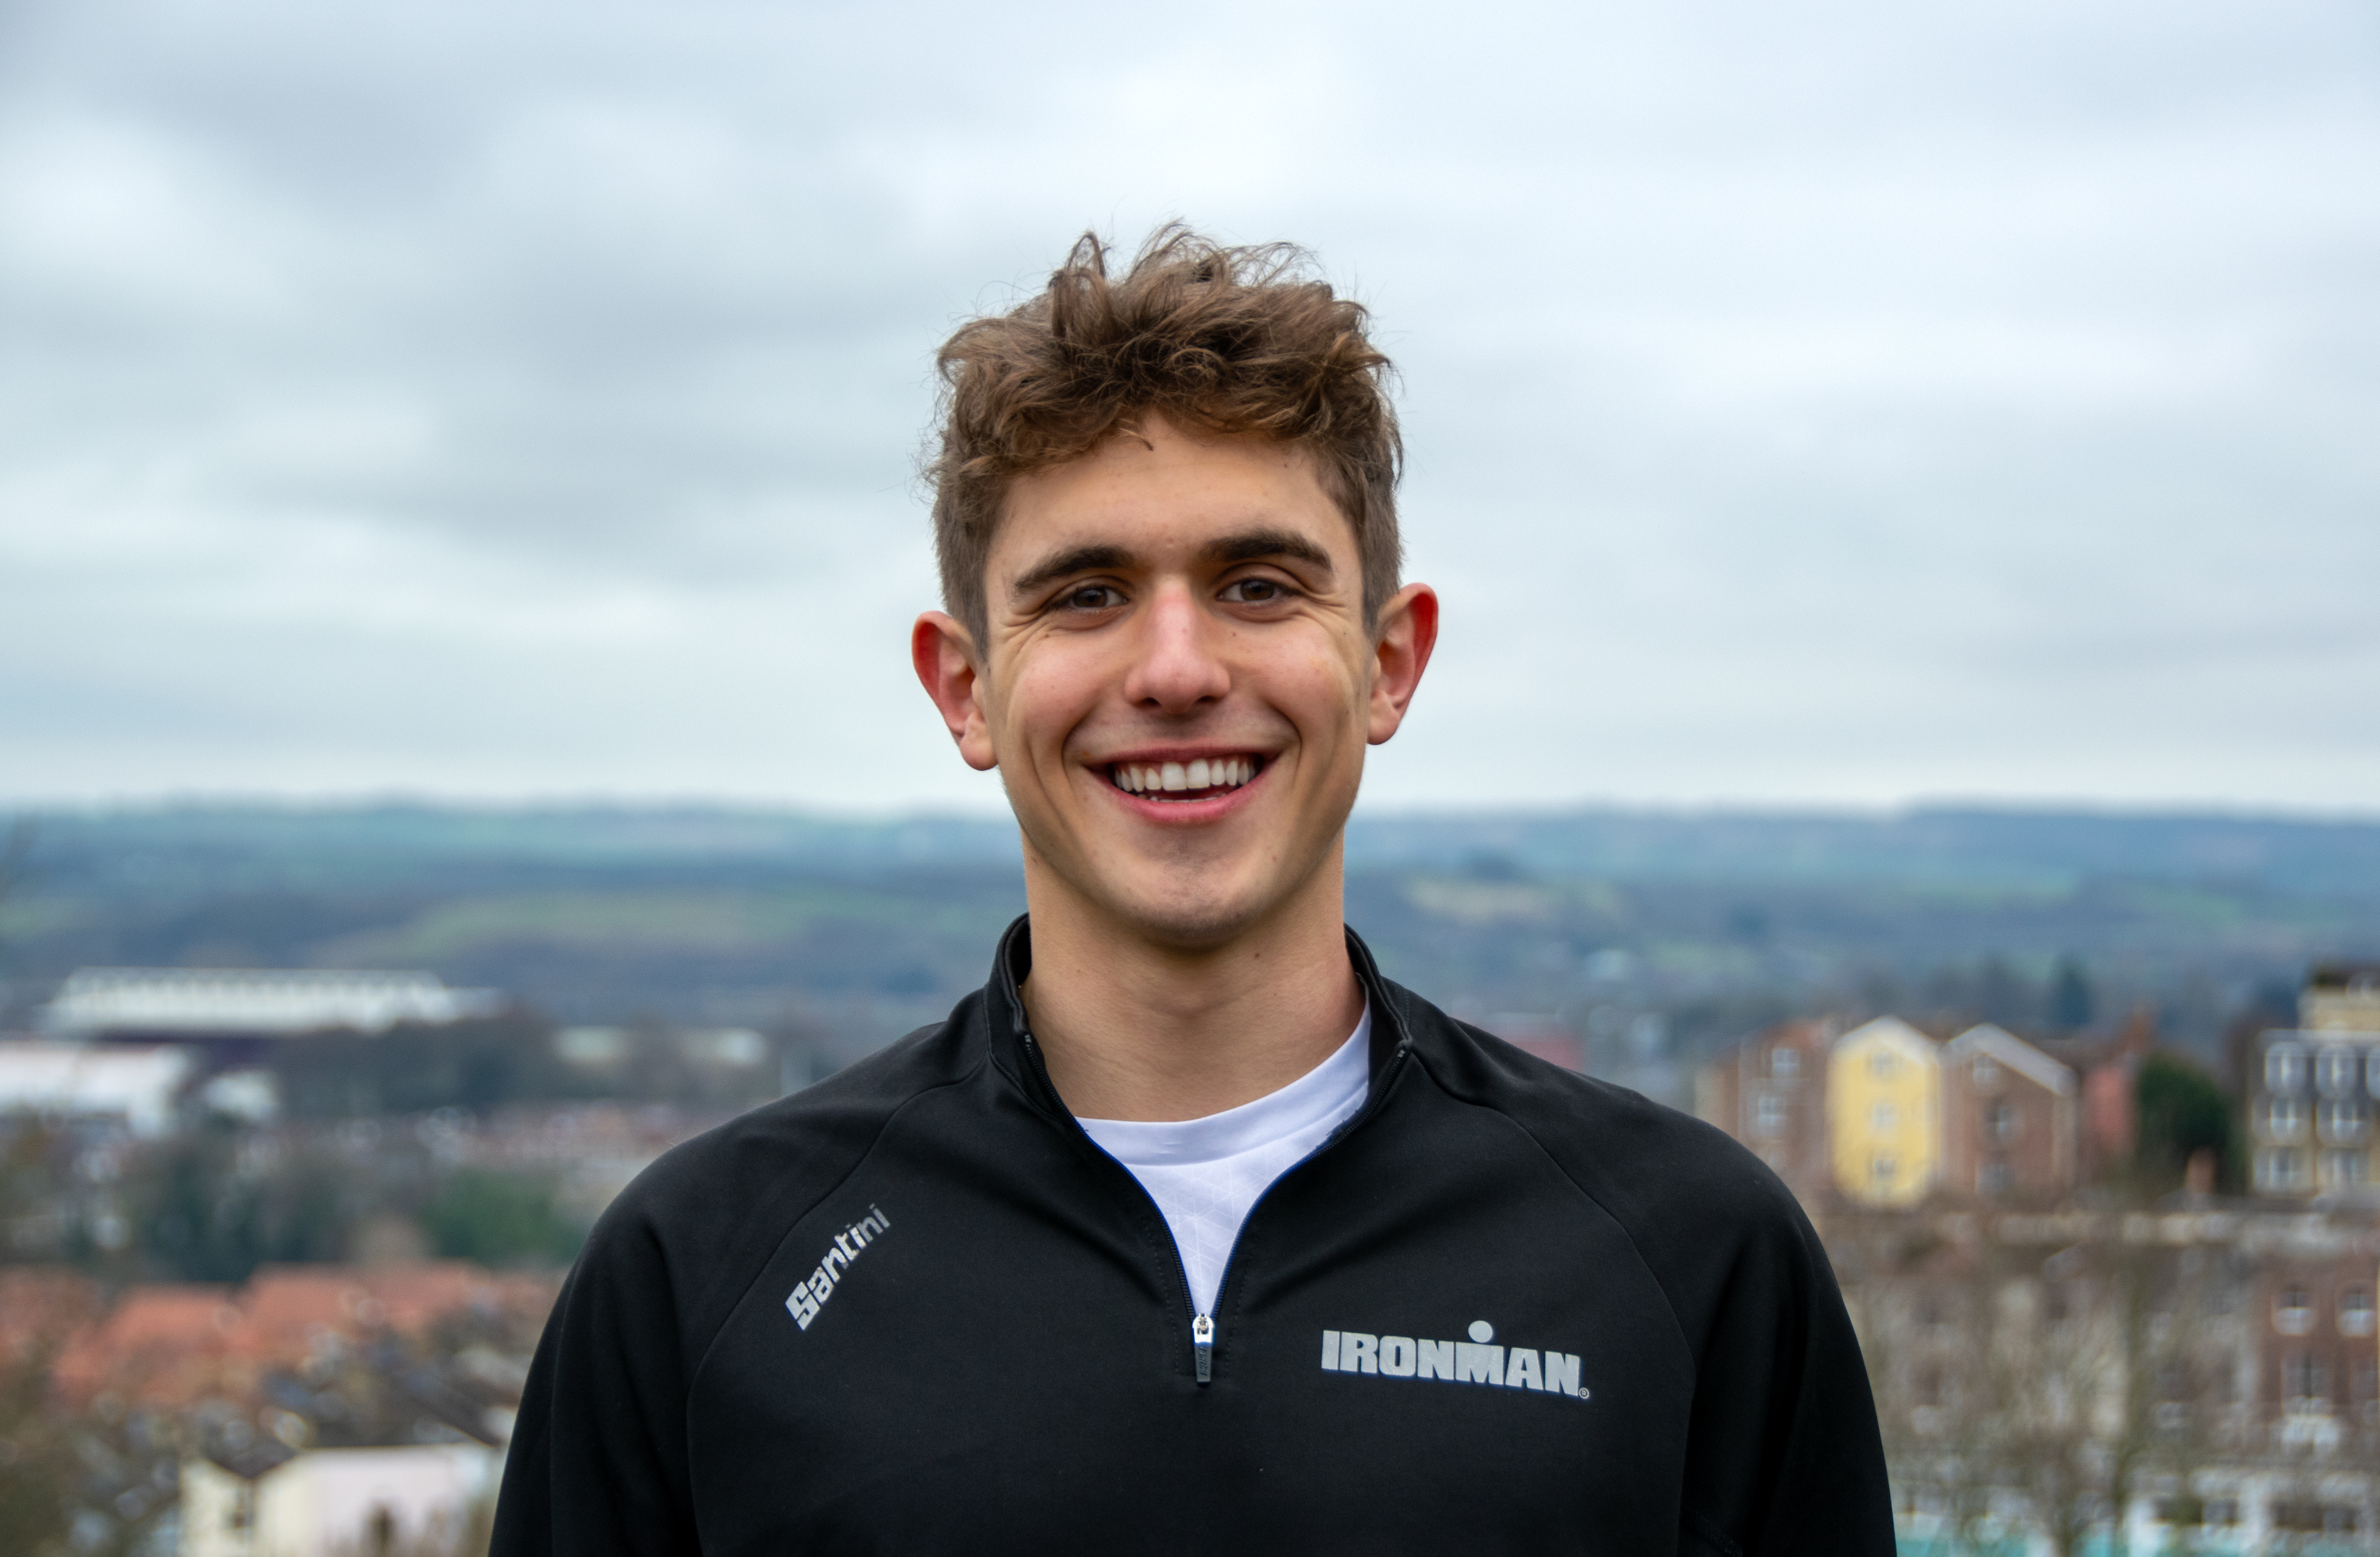 Matt Kaminer started training after his GCSE exams were cancelled during the Covid-19 pandemic and has now obtained his Ironman licence (University of Bristol/PA)